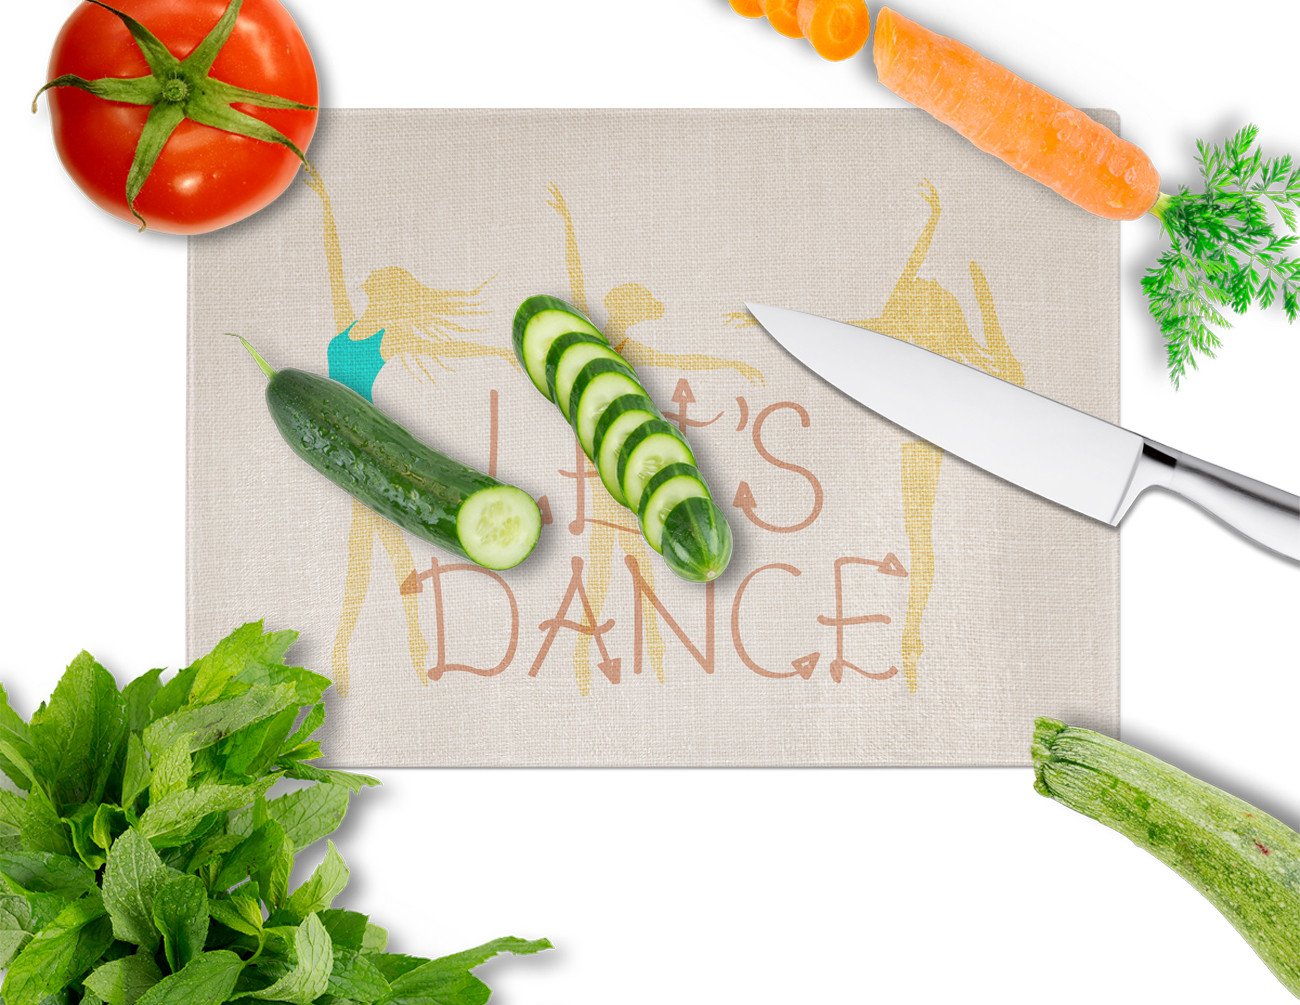 Let's Dance Linen Light Glass Cutting Board Large BB5376LCB by Caroline's Treasures